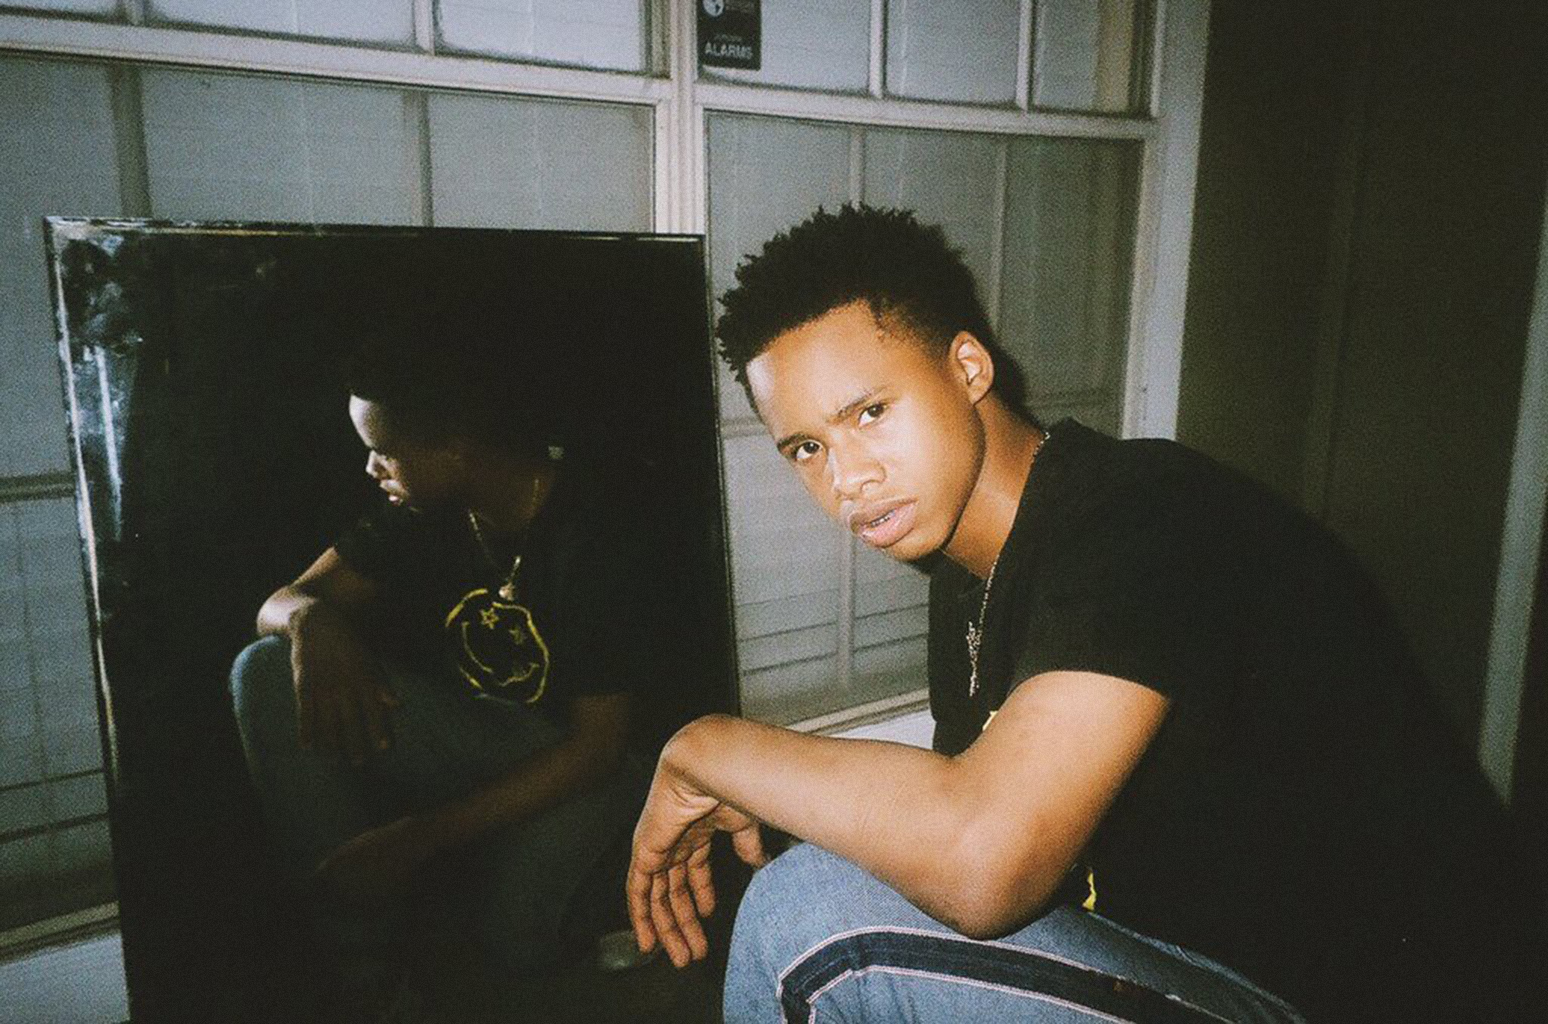 19 Year Old Rapper, Tay-K, Sentenced To 55 Years In Prison For A Deadly Robbery